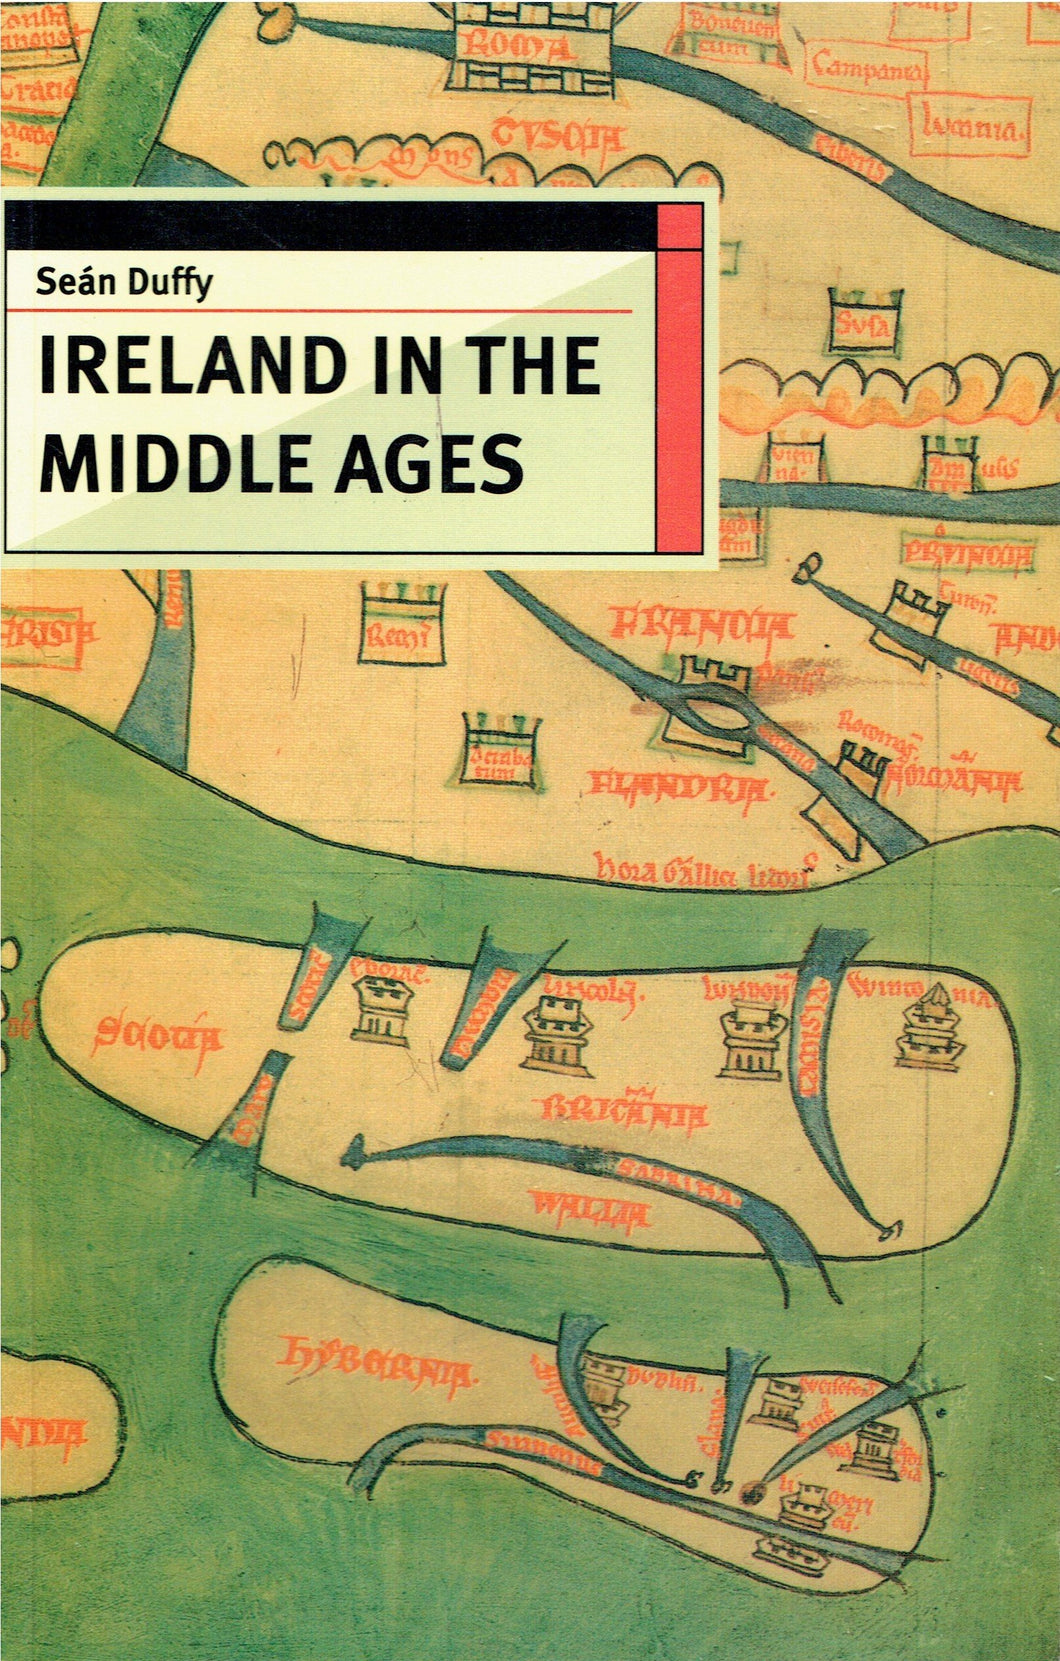 Ireland in the Middle Ages